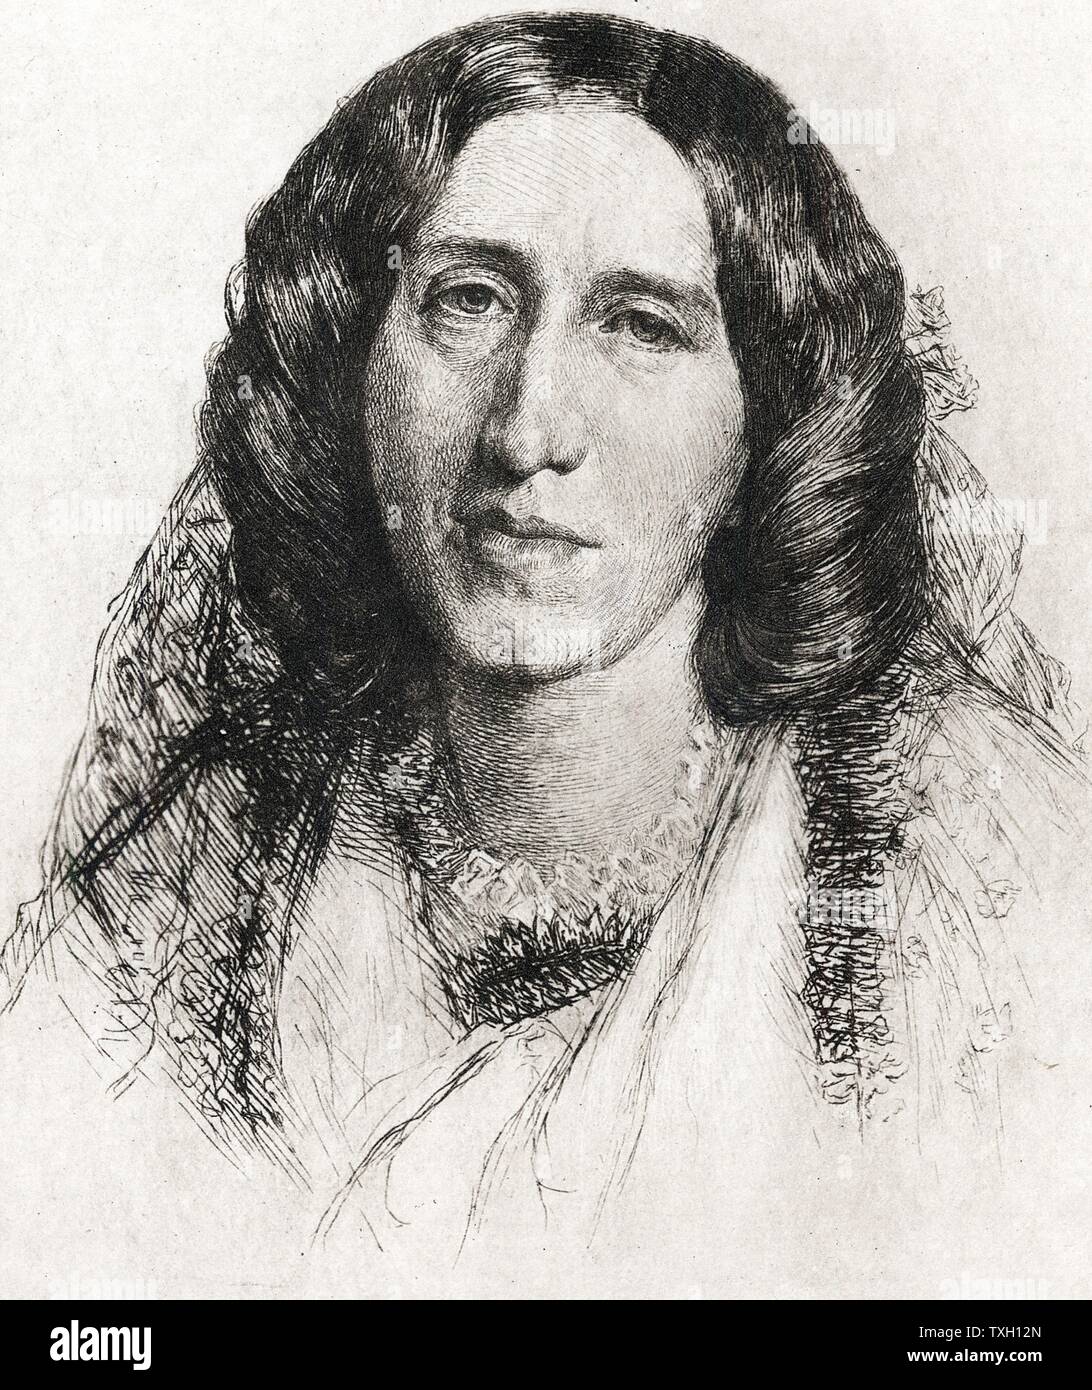 George Eliot - pen name of Mary Ann Evans (1819-1880). English novelist poet and critic. Etching after portrait by Frederick Burton Stock Photo